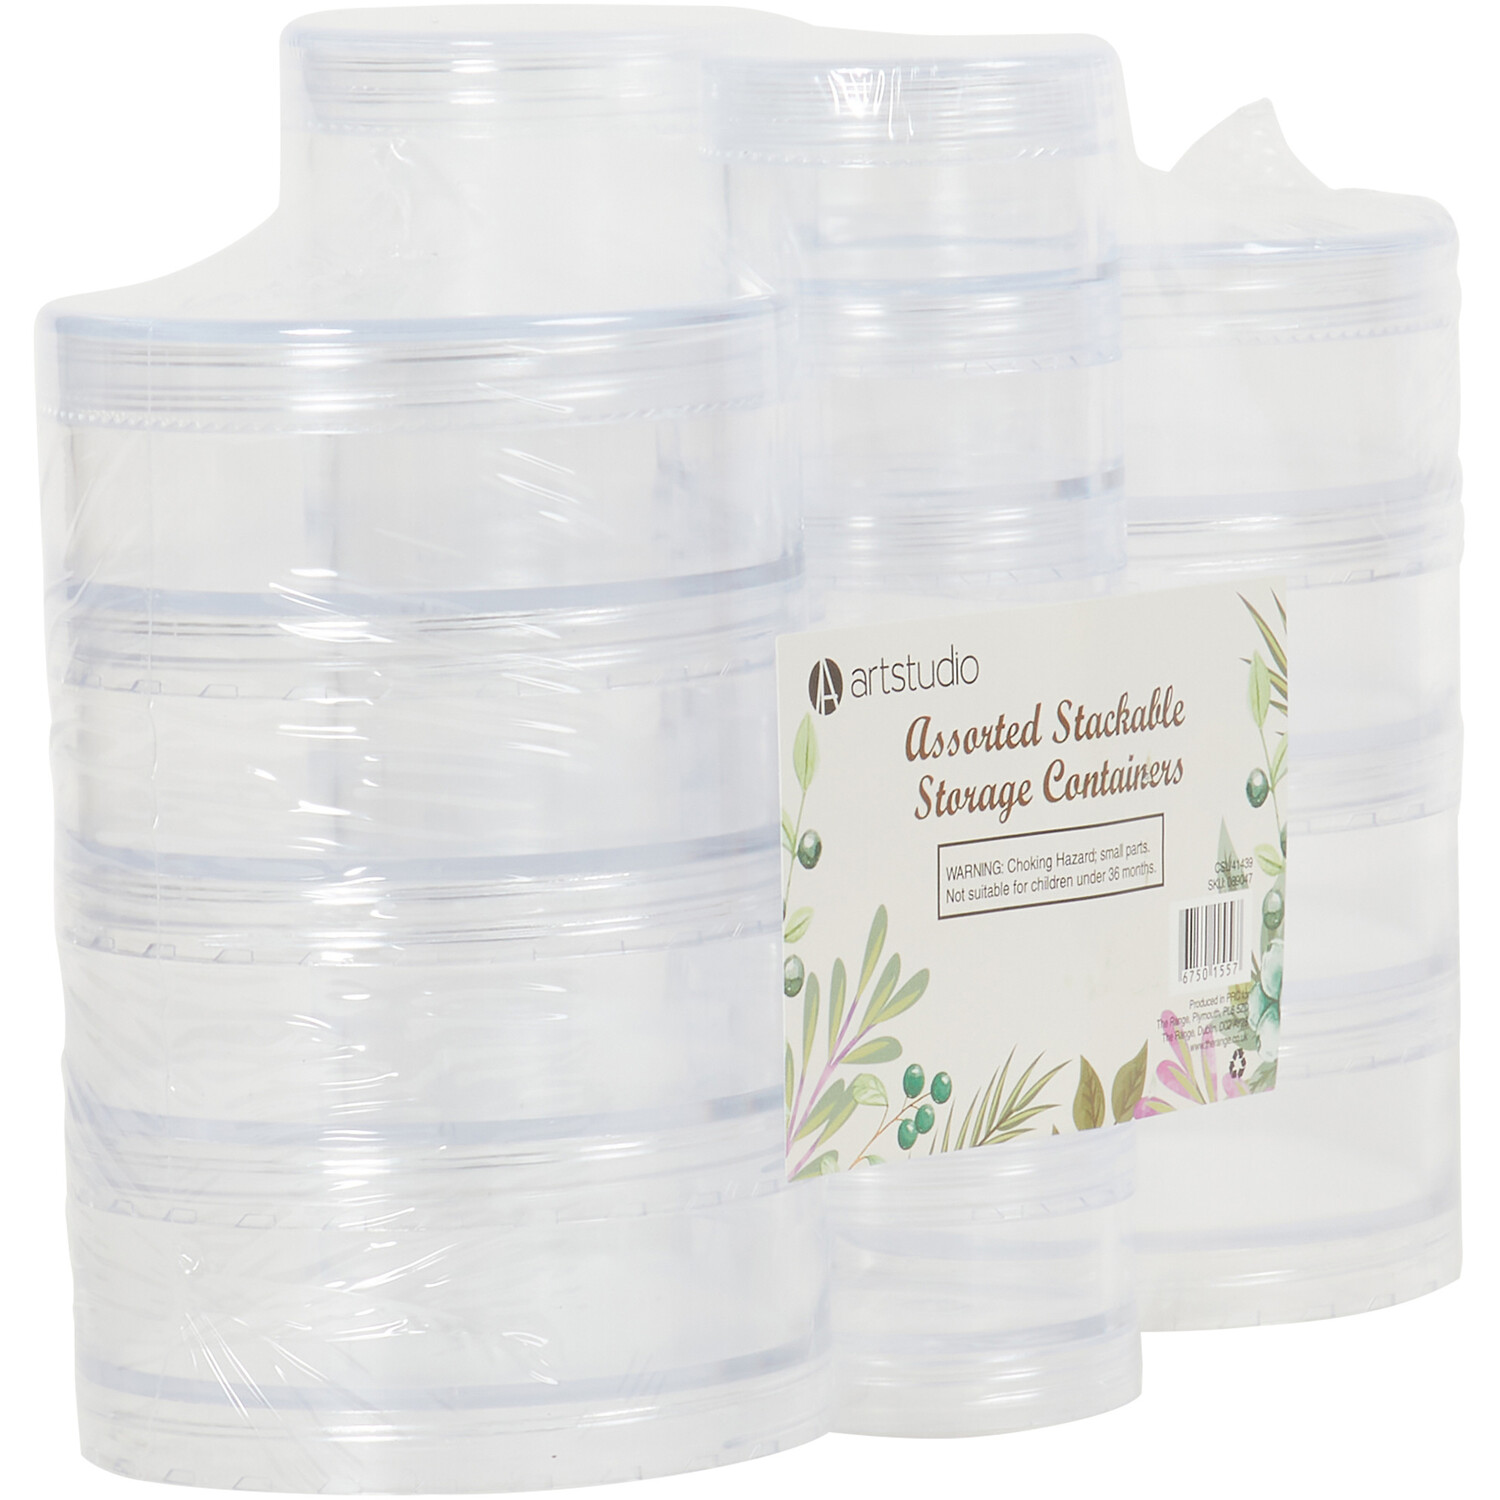 Assorted Stackable Storage Containers Image 2